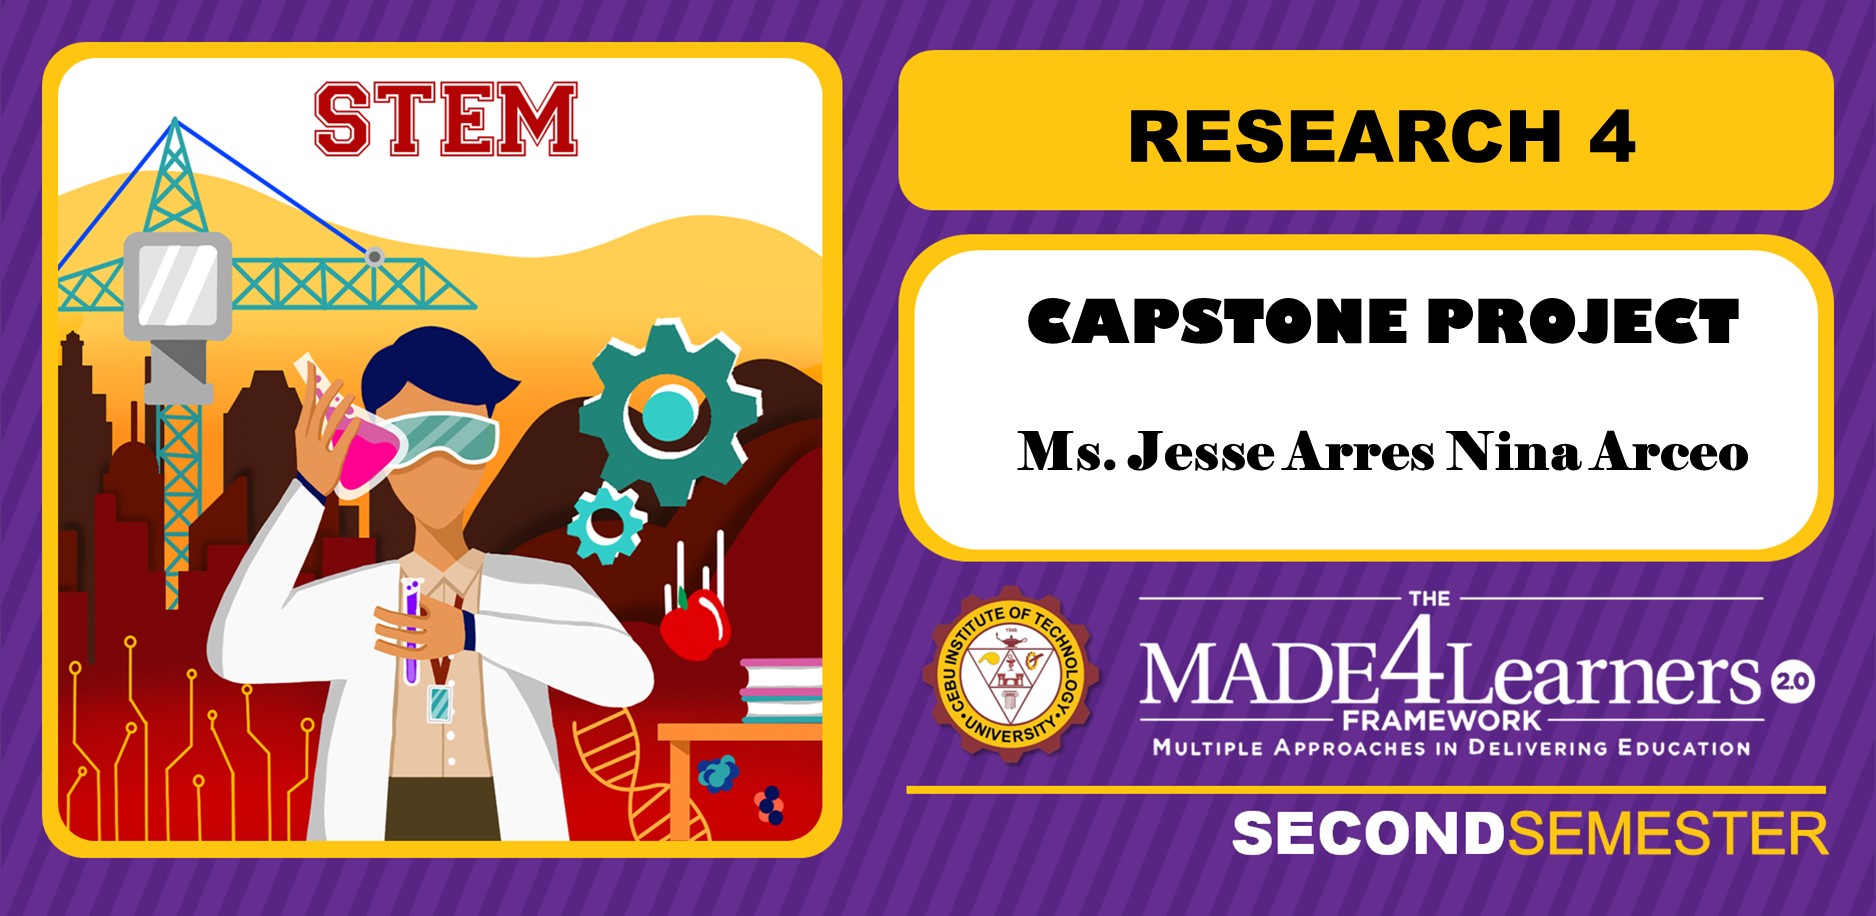 RES4: Capstone Project (Arceo)